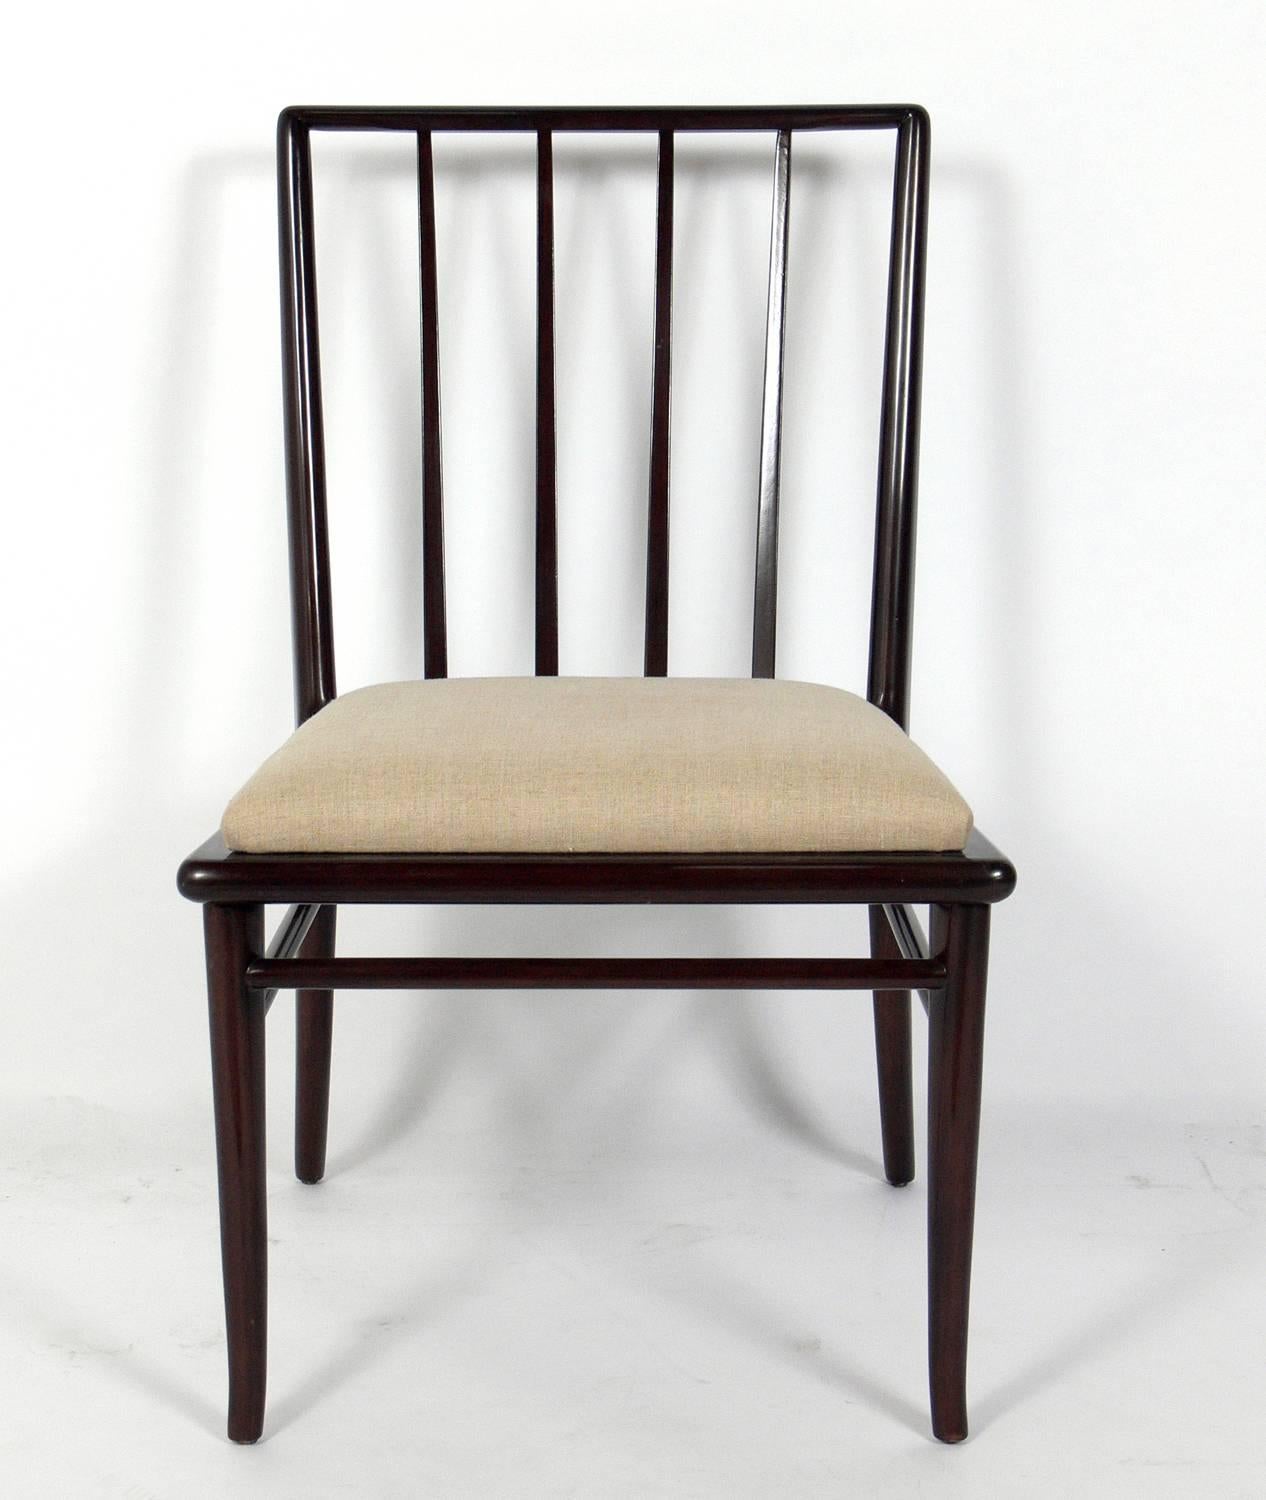 Set of four dining chairs, designed by T.H. Robsjohn-Gibbings for Widdicomb, American, circa 1950s. They have been refinished in a deep brown and reupholstered in a sand colored linen type fabric. They would look great with any of the Robsjohn